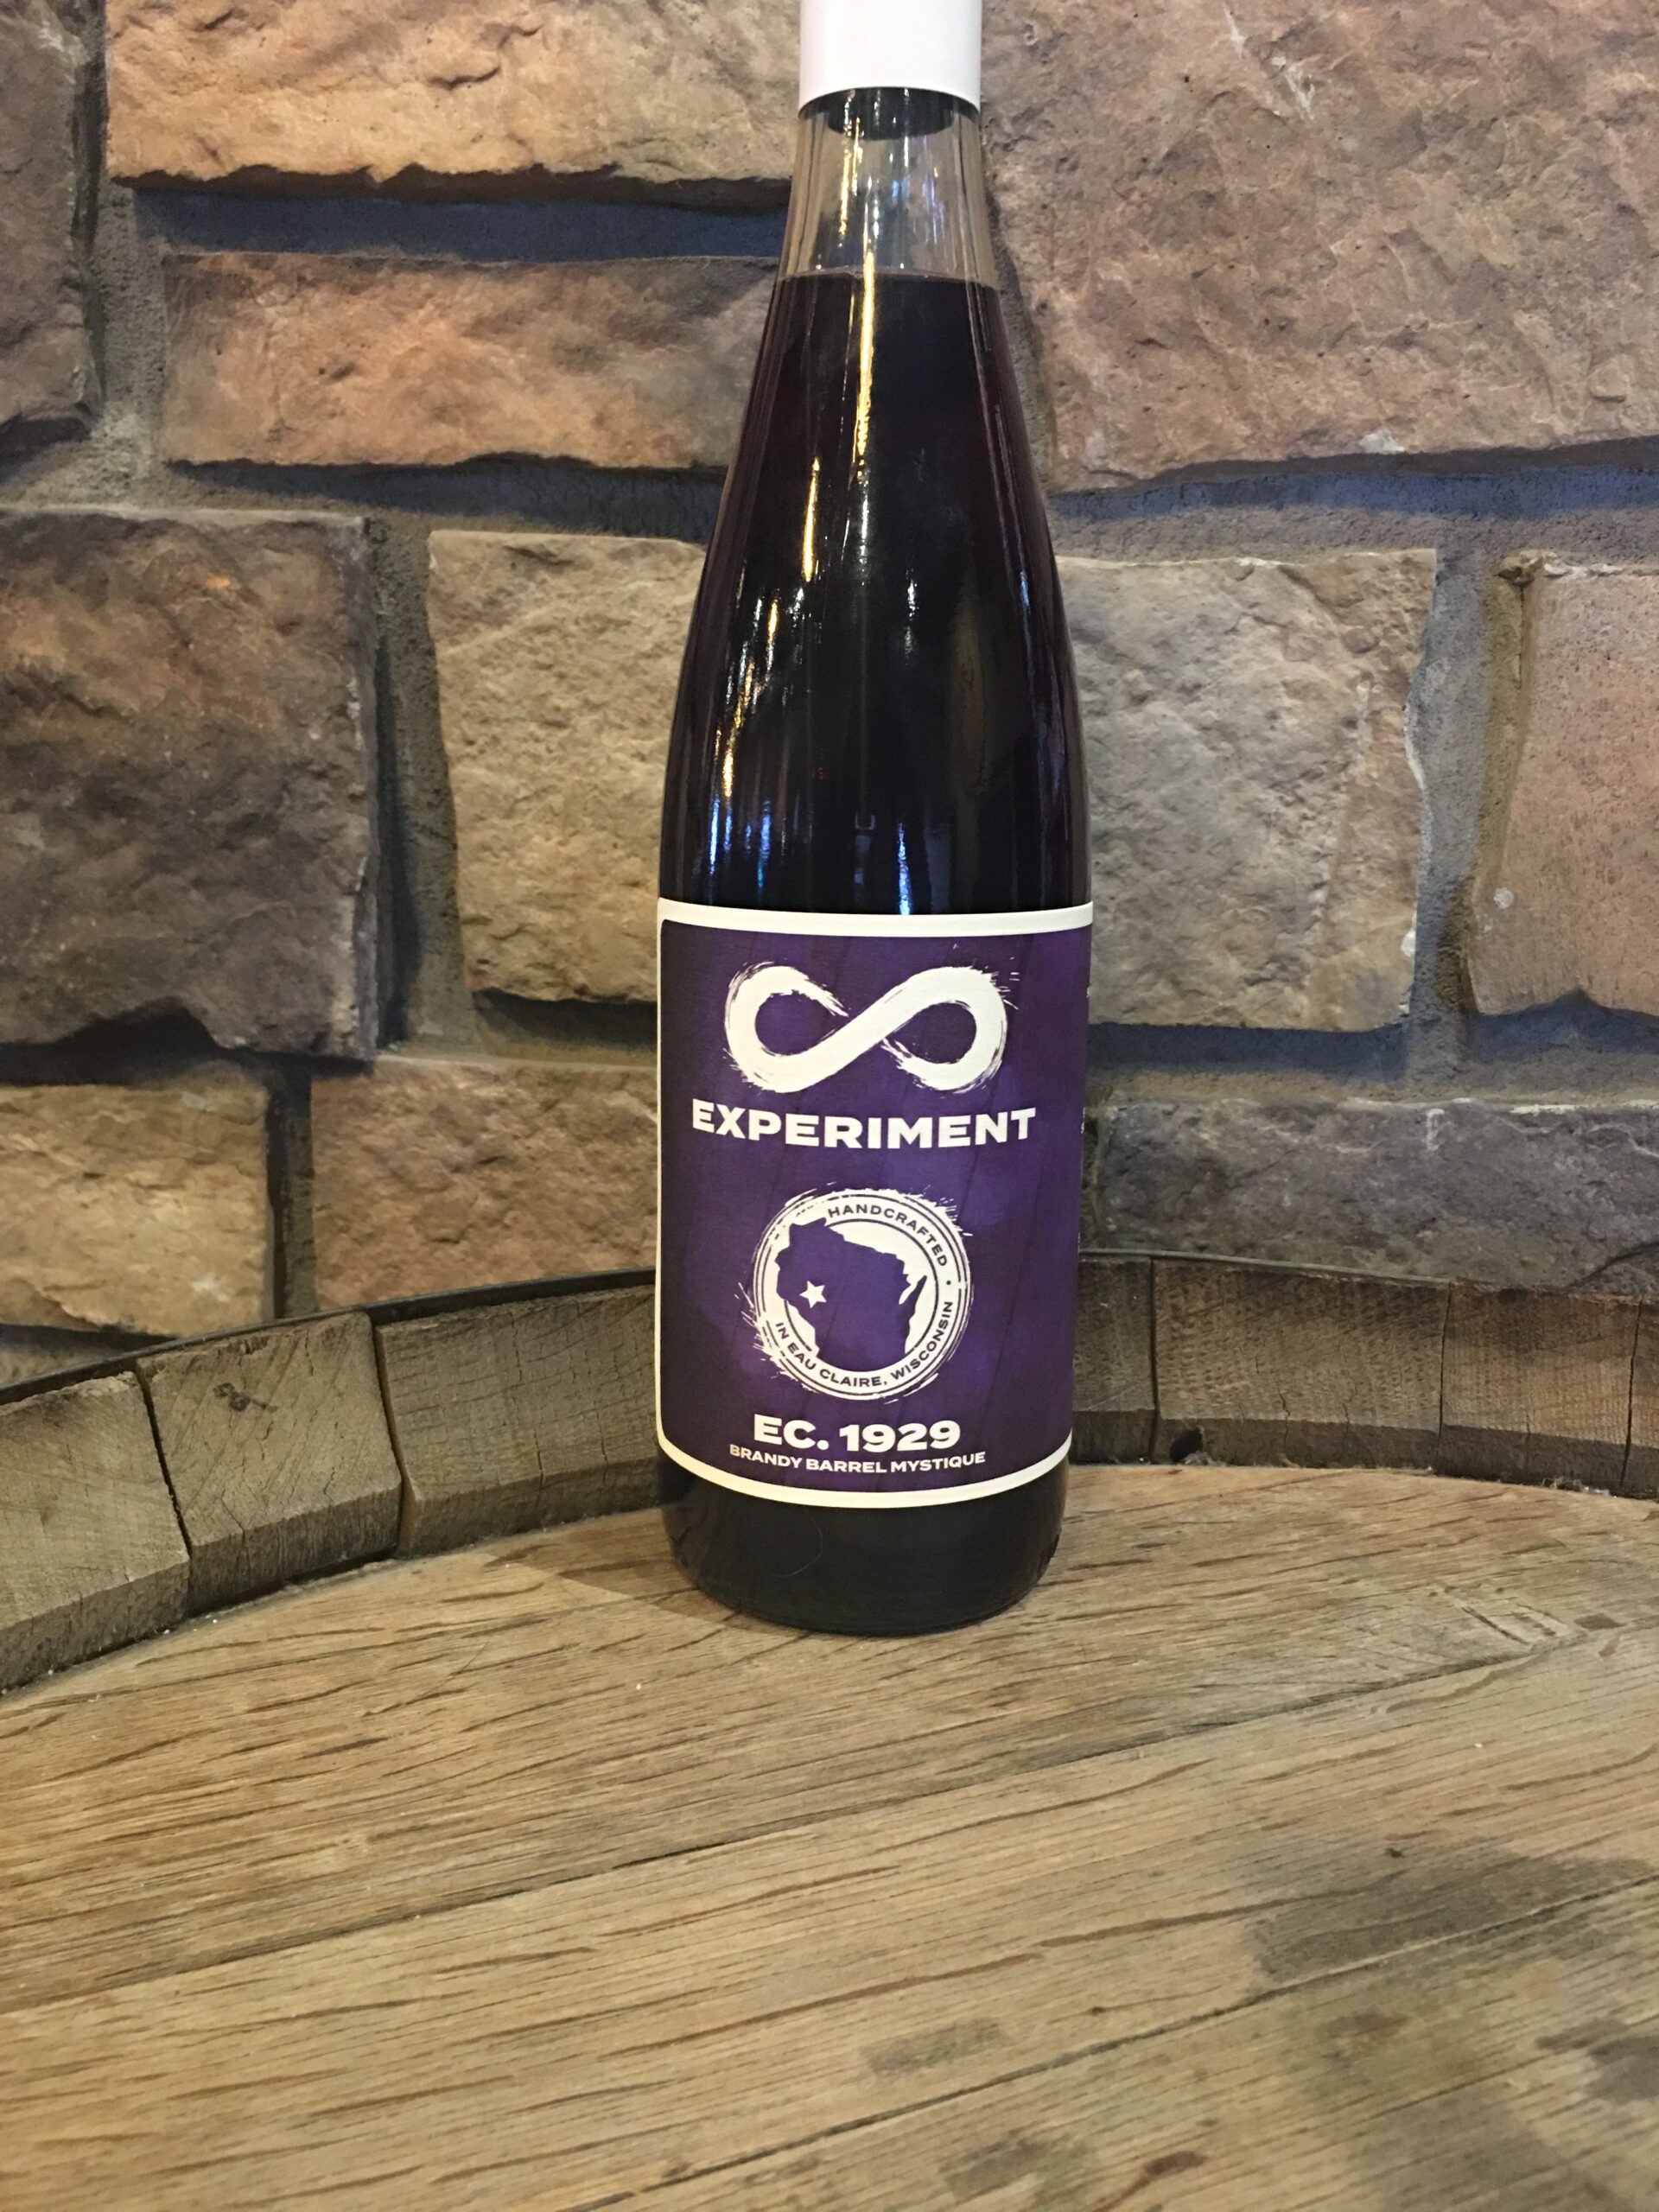 Read more about the article Brandy Barrel Mystique Wine Early Release!